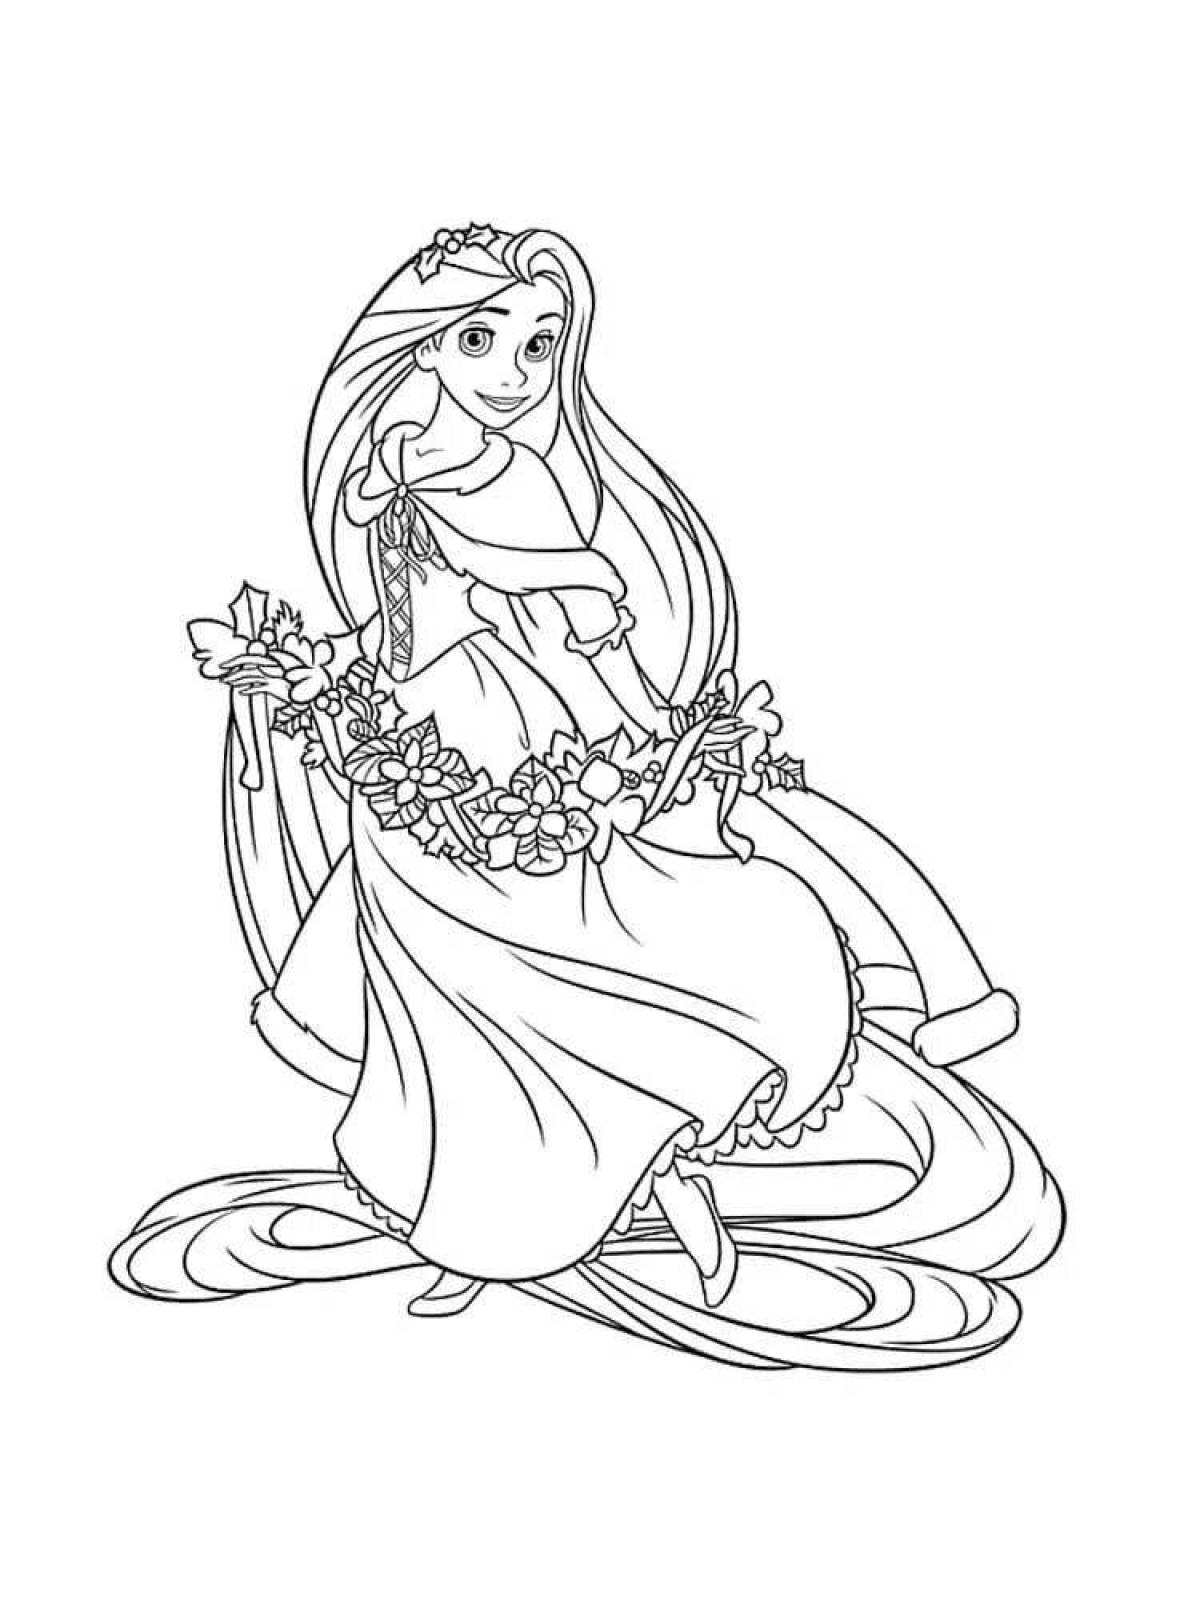 Inviting rapunzel coloring book for kids